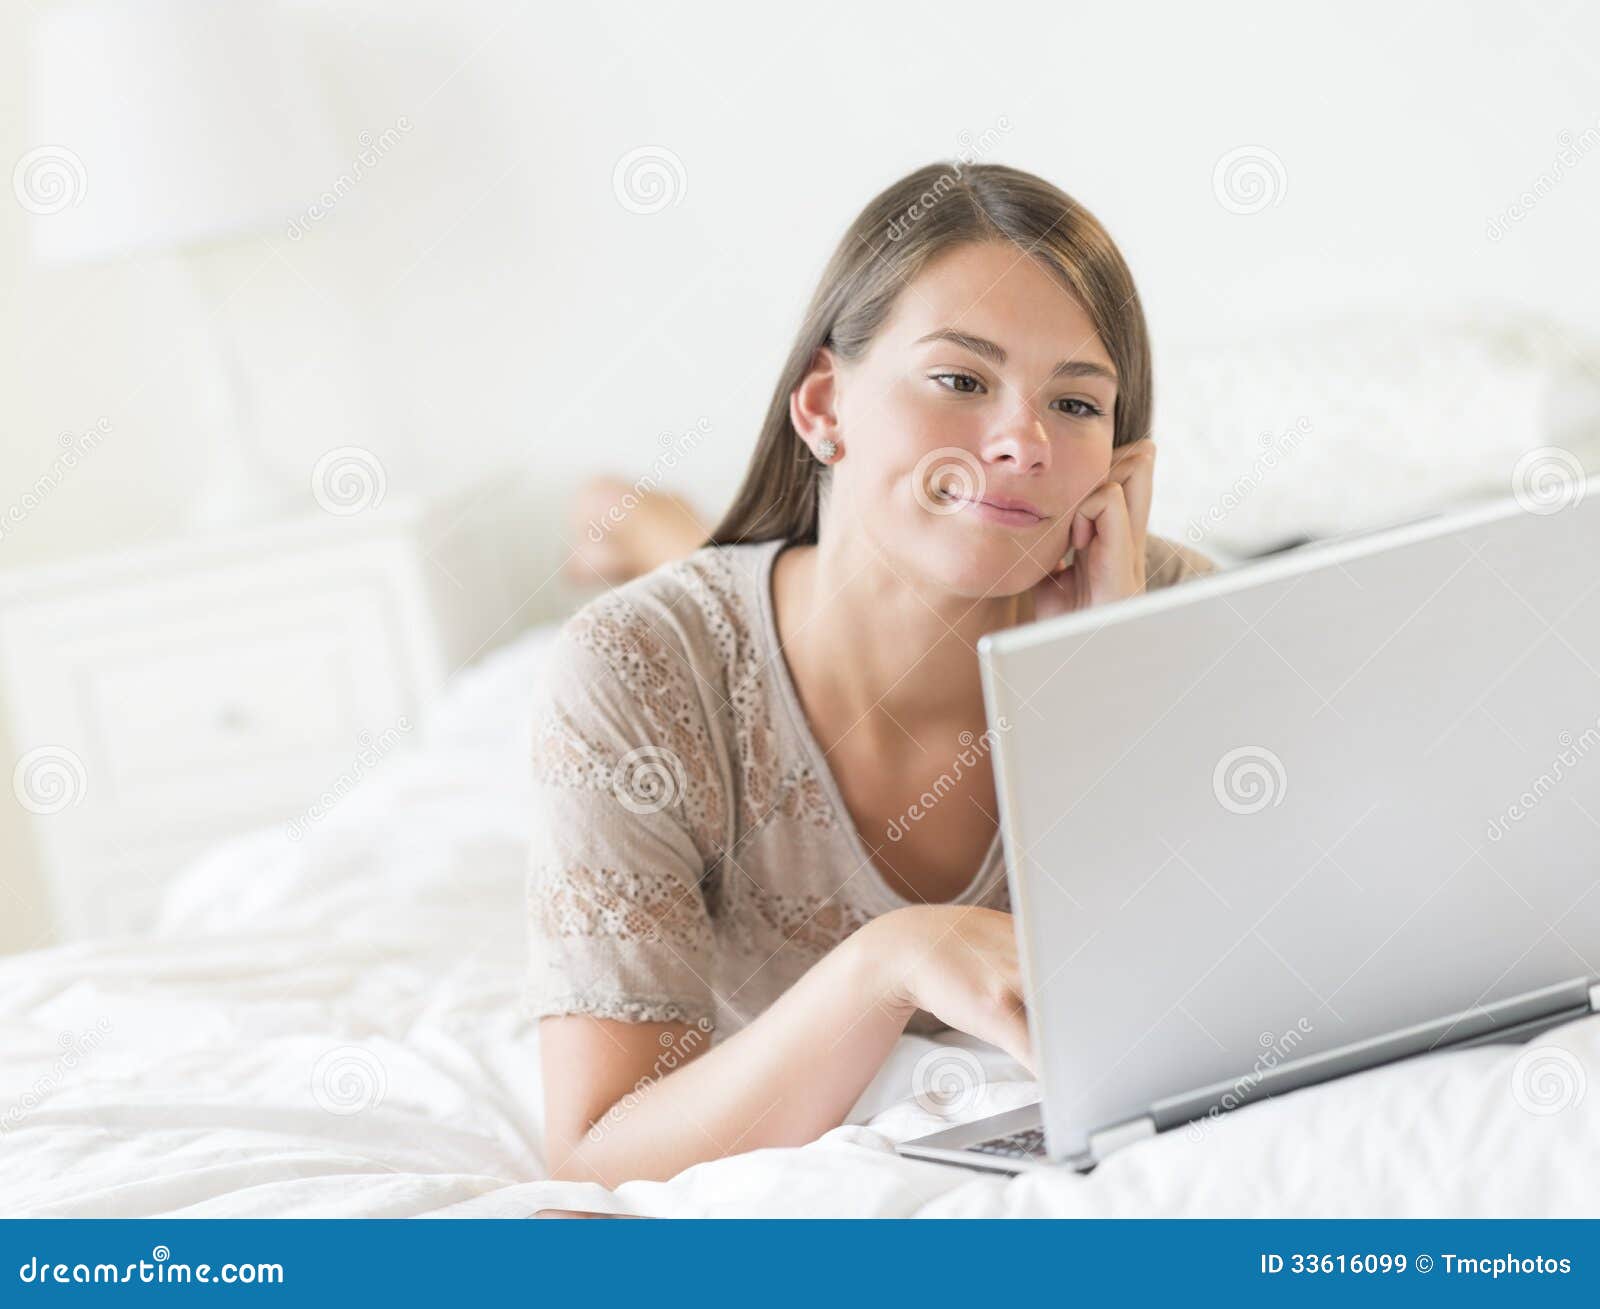 Girl Smiling While Using Laptop In Bed Royalty Free Stock Images Image 33616099